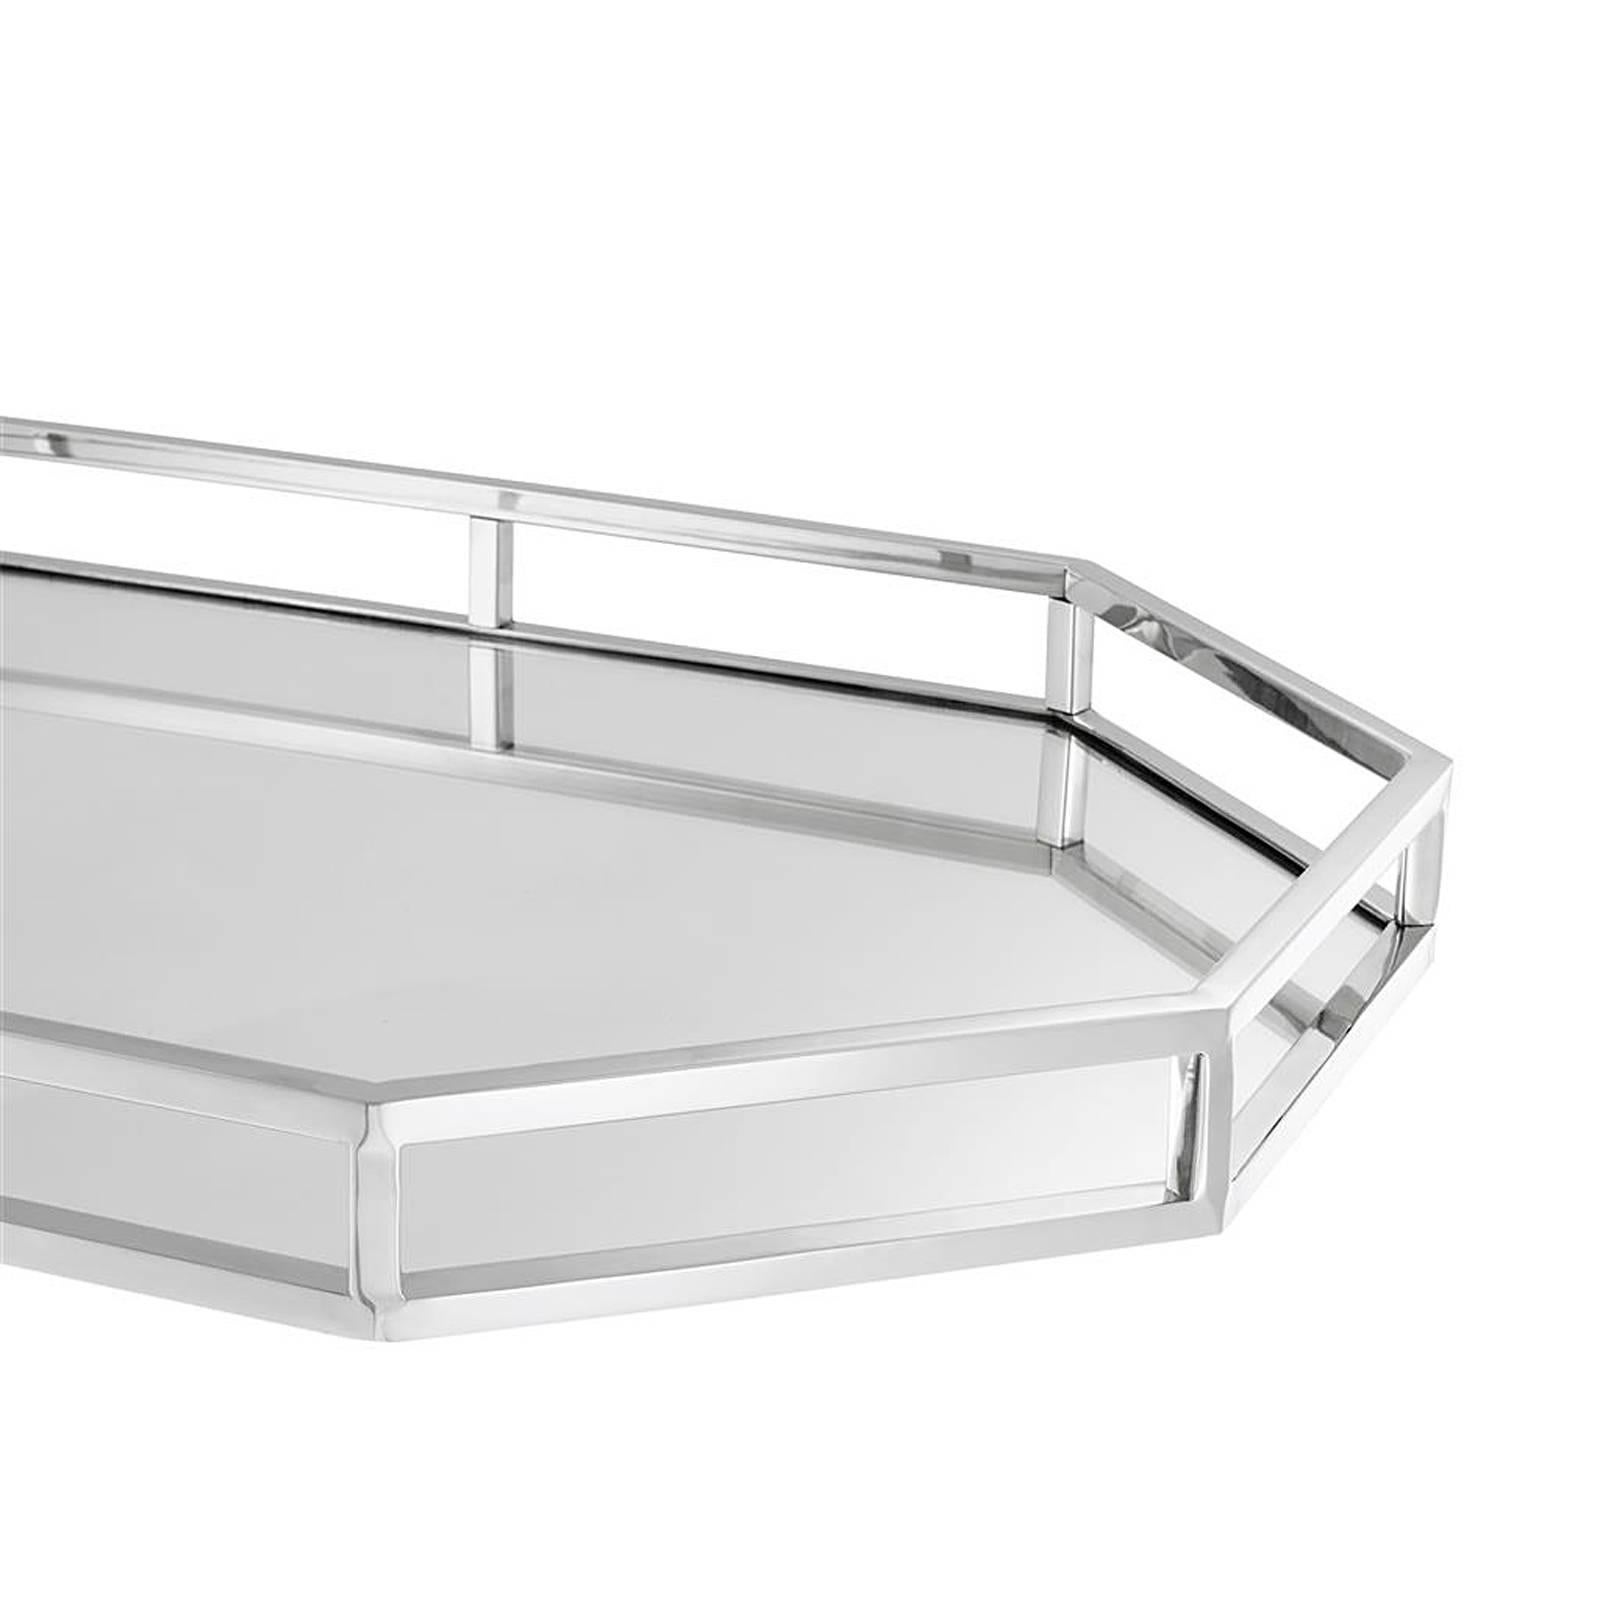 Polished Sigma Tray in Nickel Finish and Mirror Glass